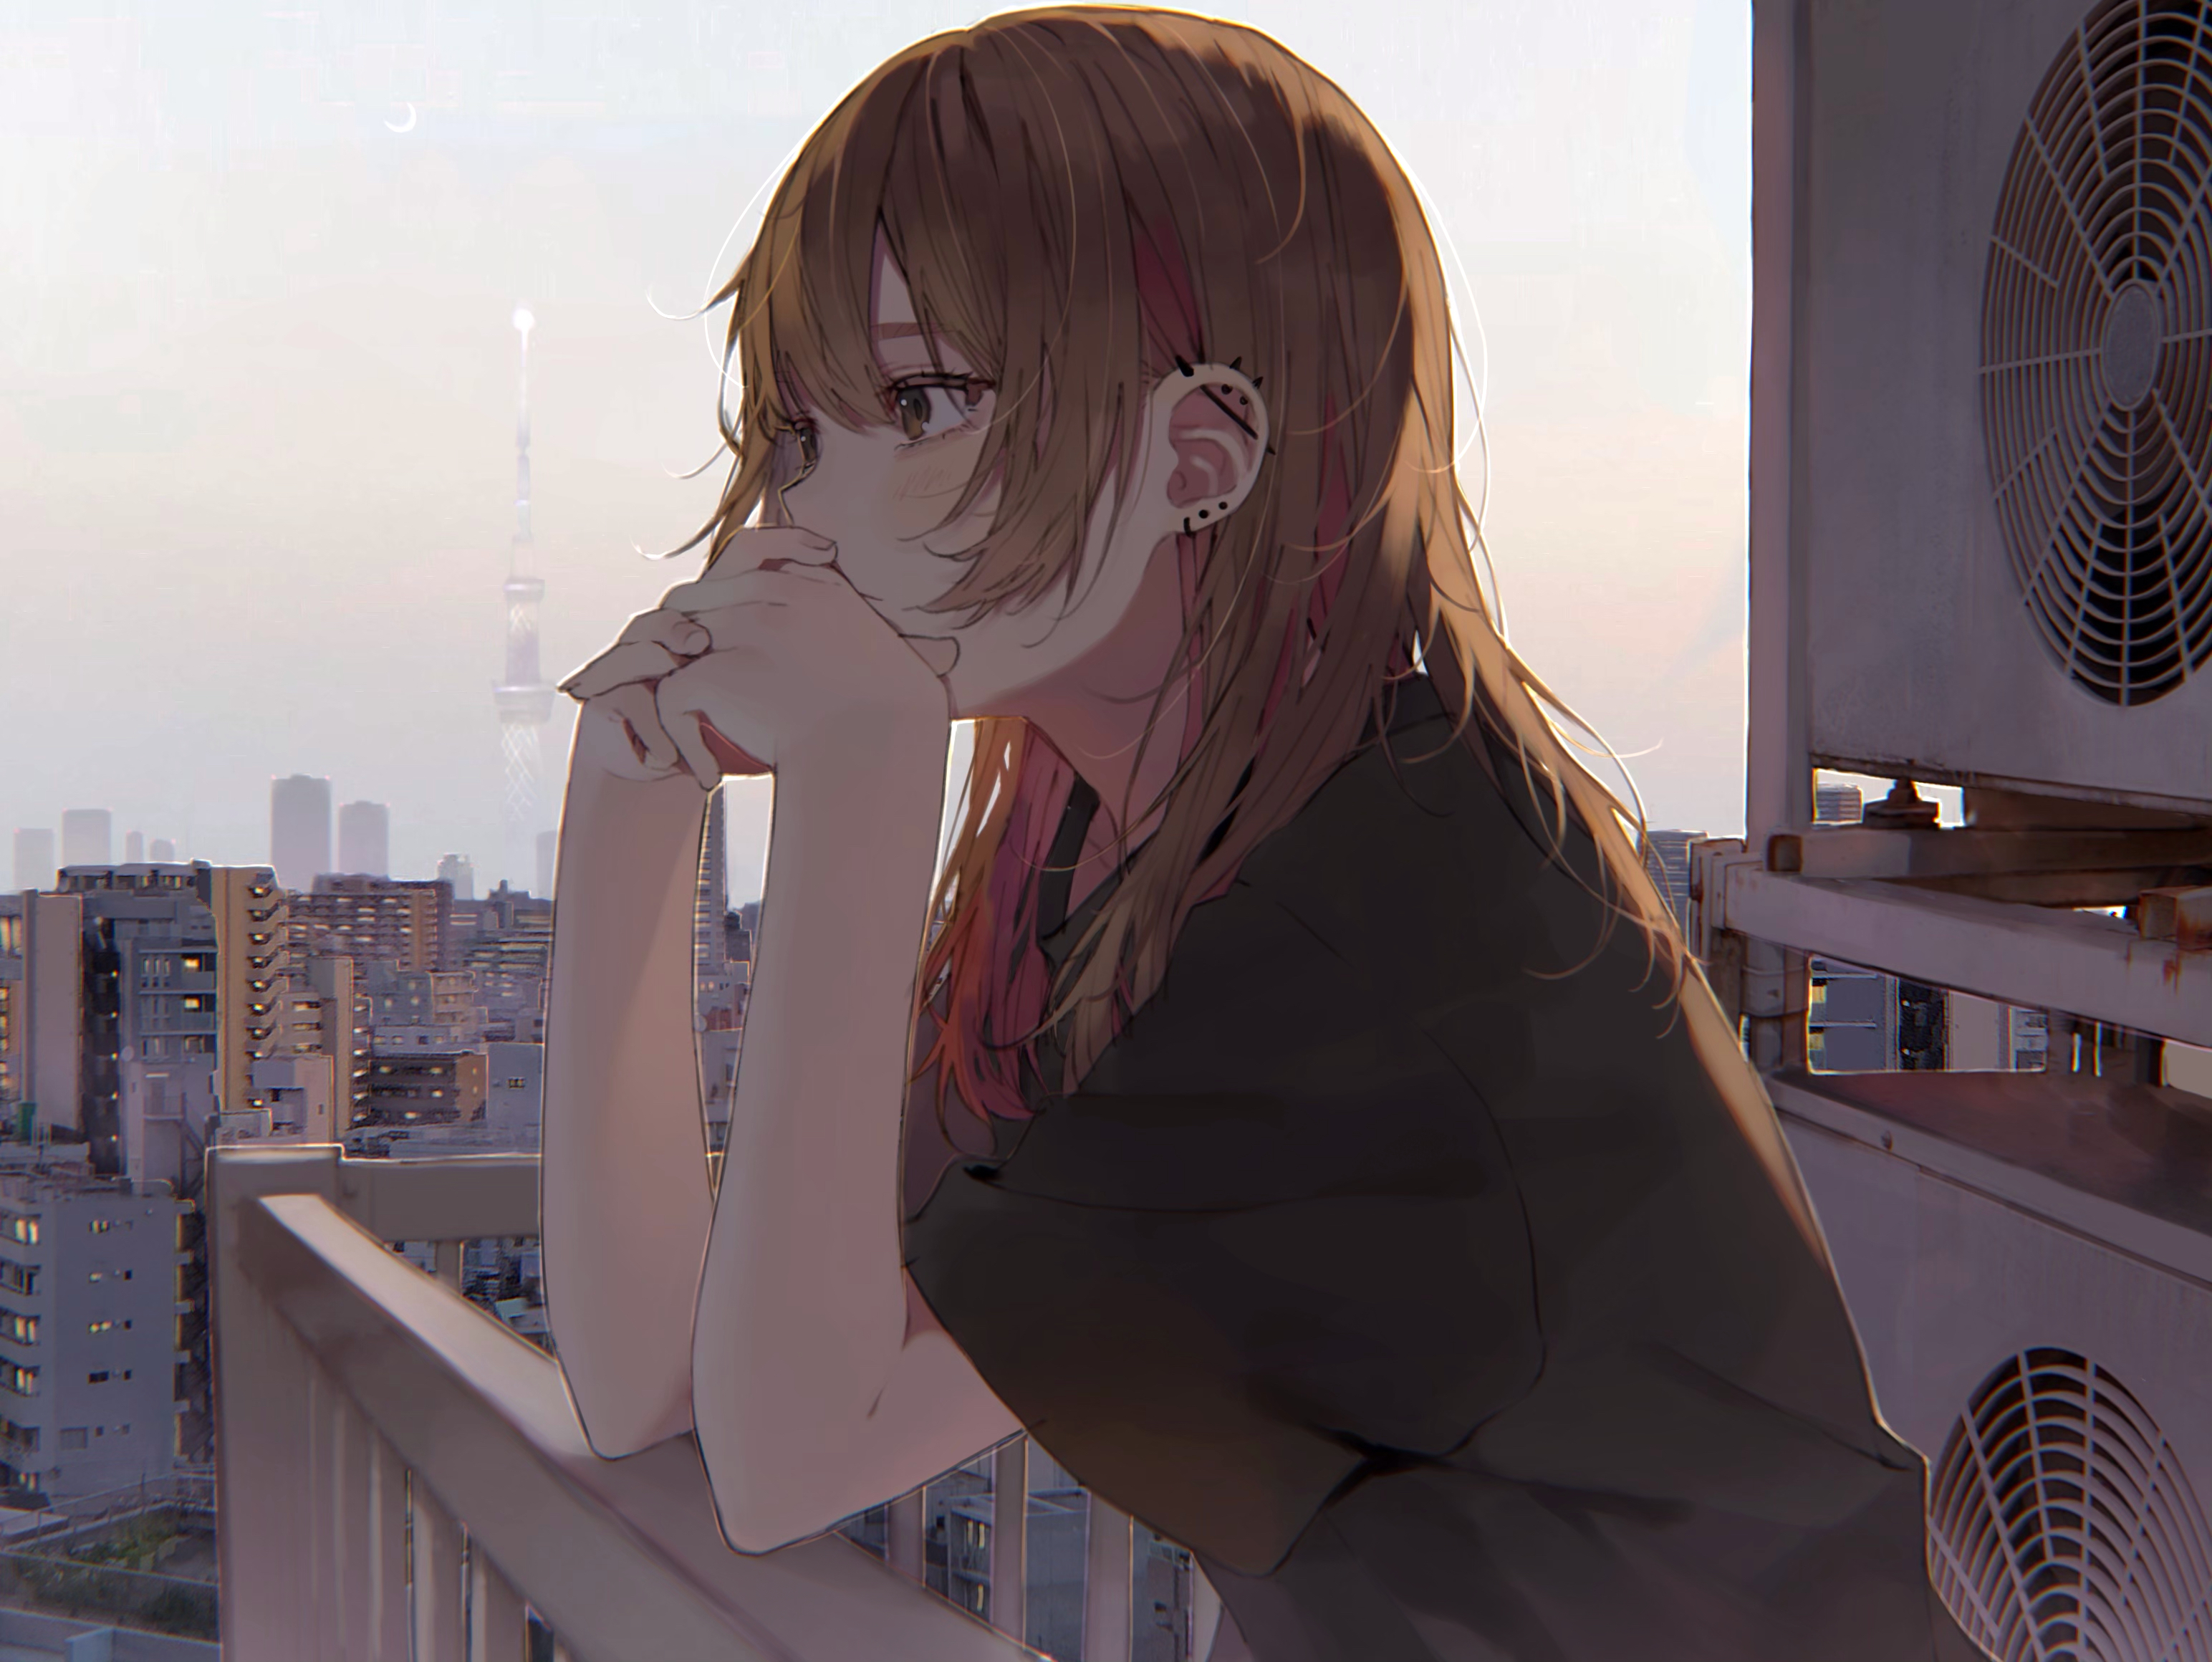 Anime Anime Girls Balcony Air Conditioning Sunset Piercing Skyline Original Characters Brunette Dyed 3088x2320